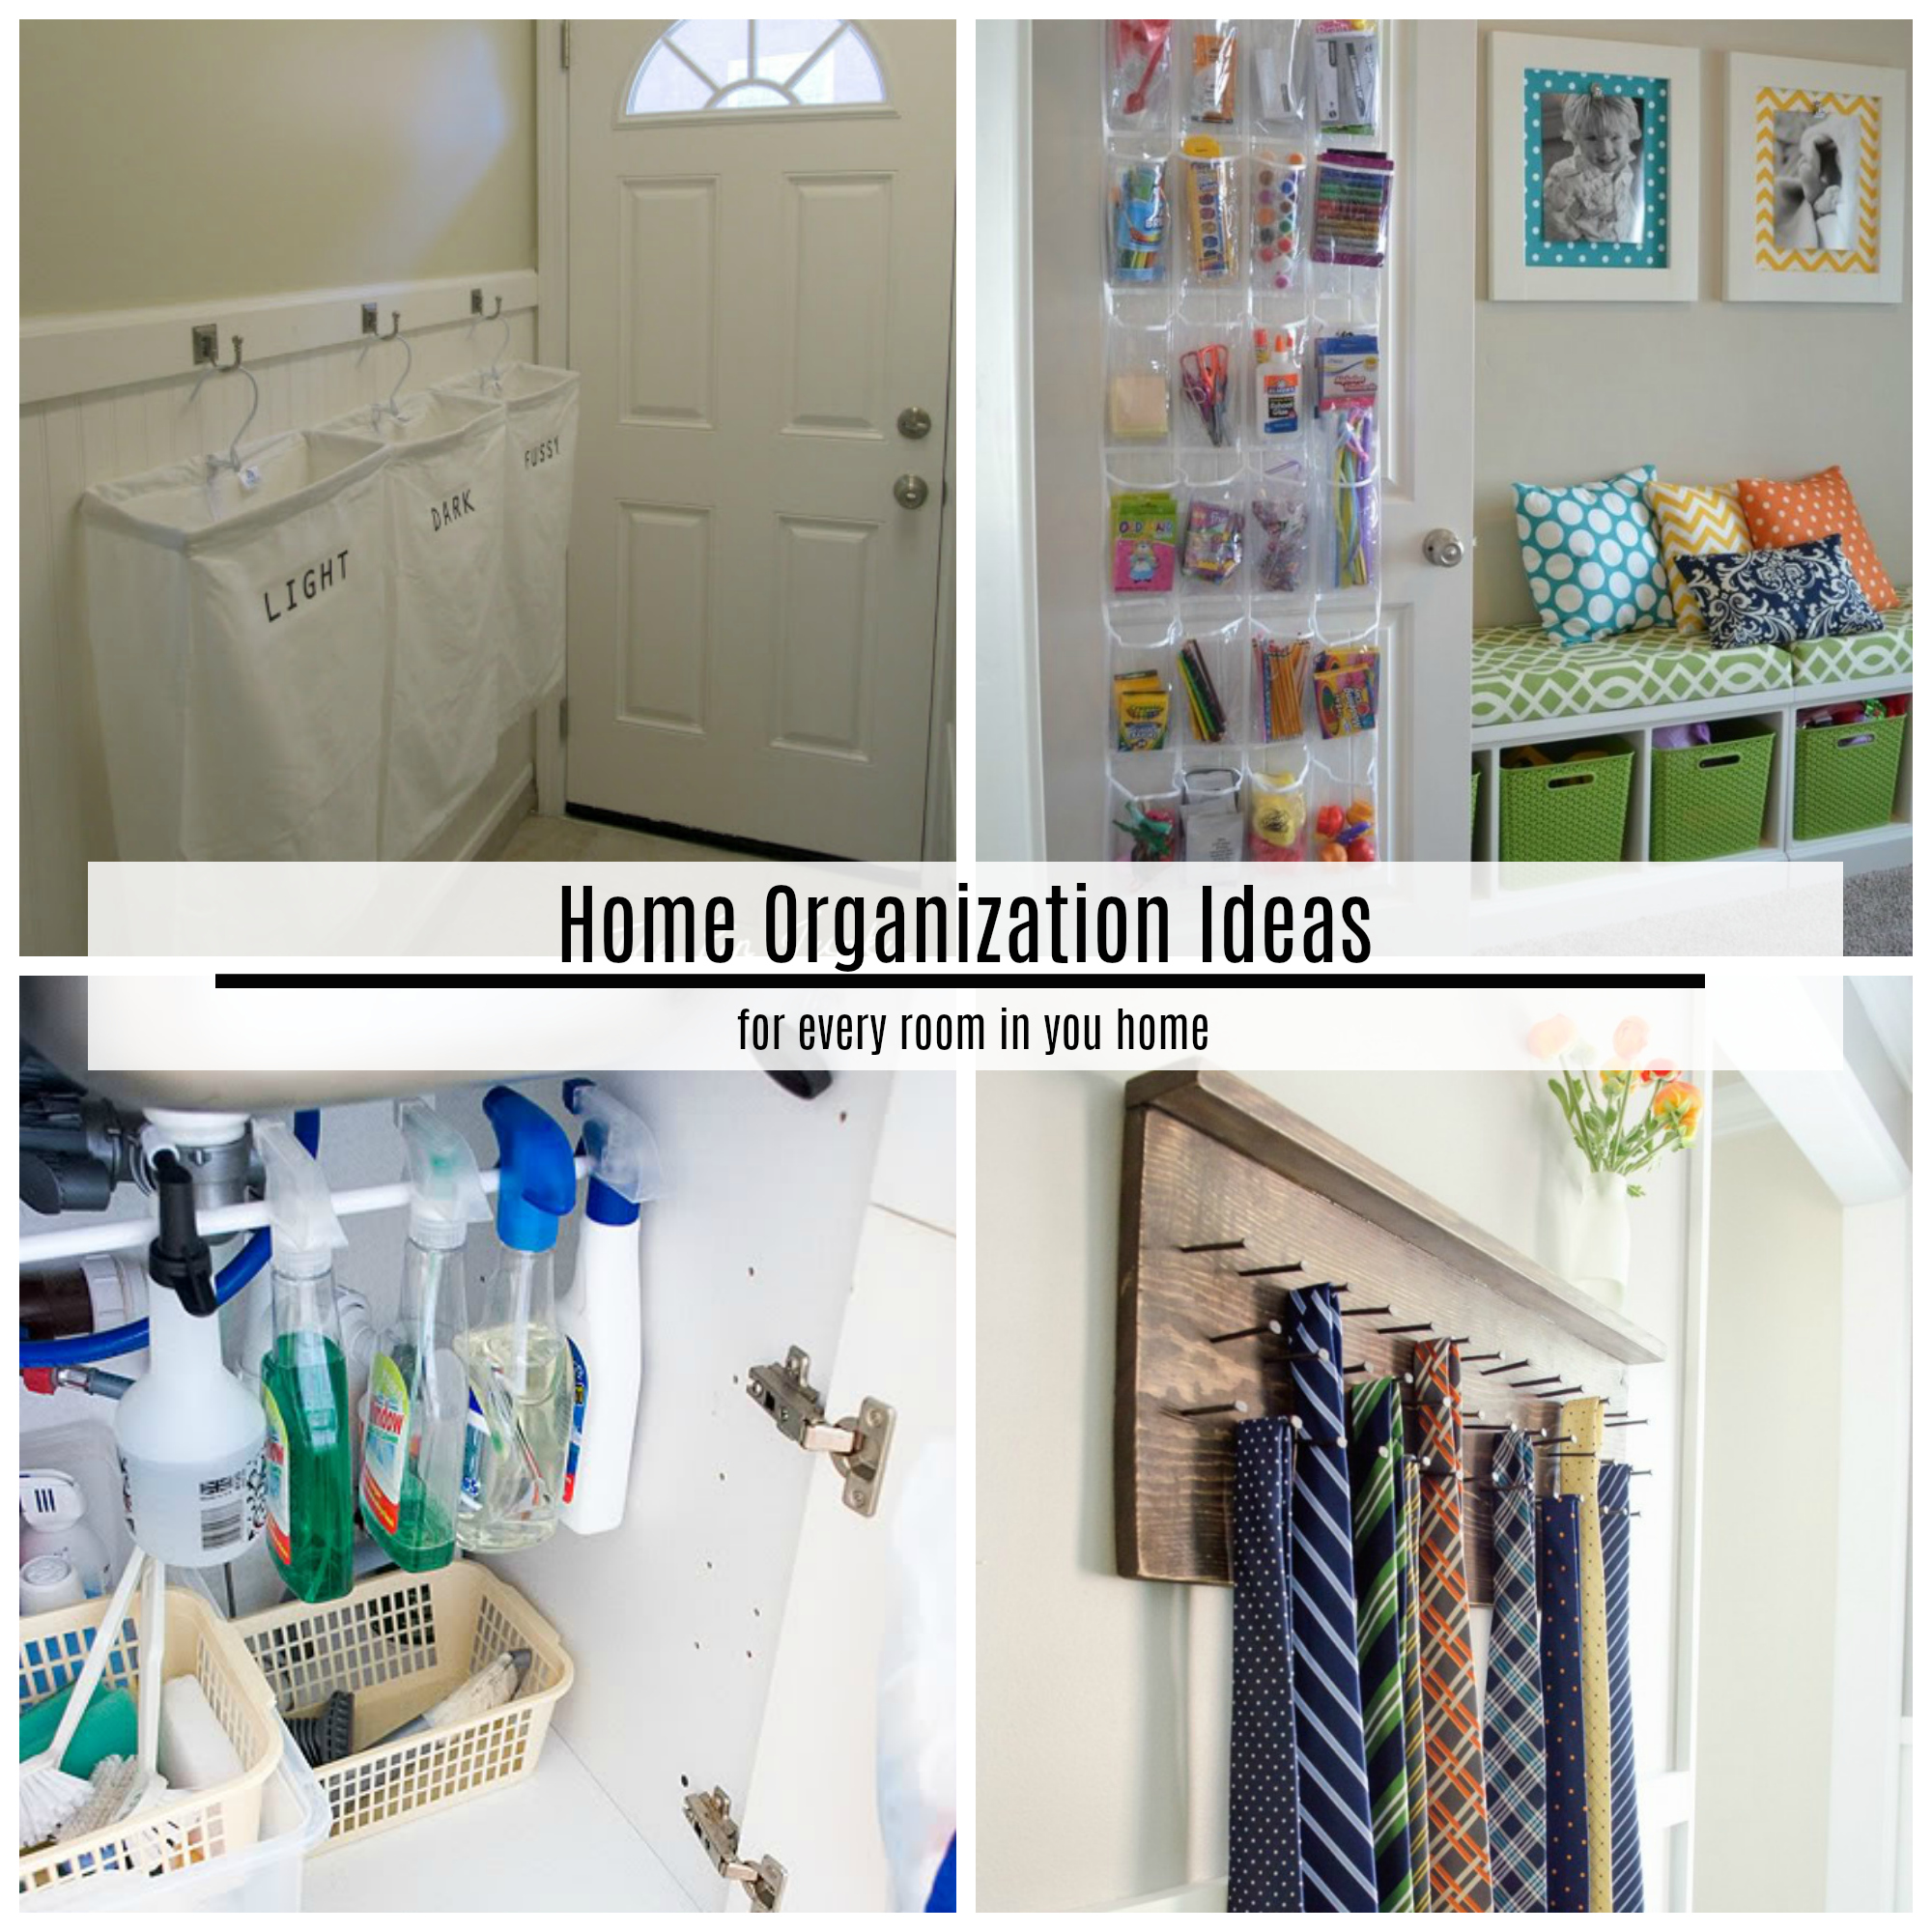 The Household Organization Diet Home Organization Plan - Clean and  Scentsible